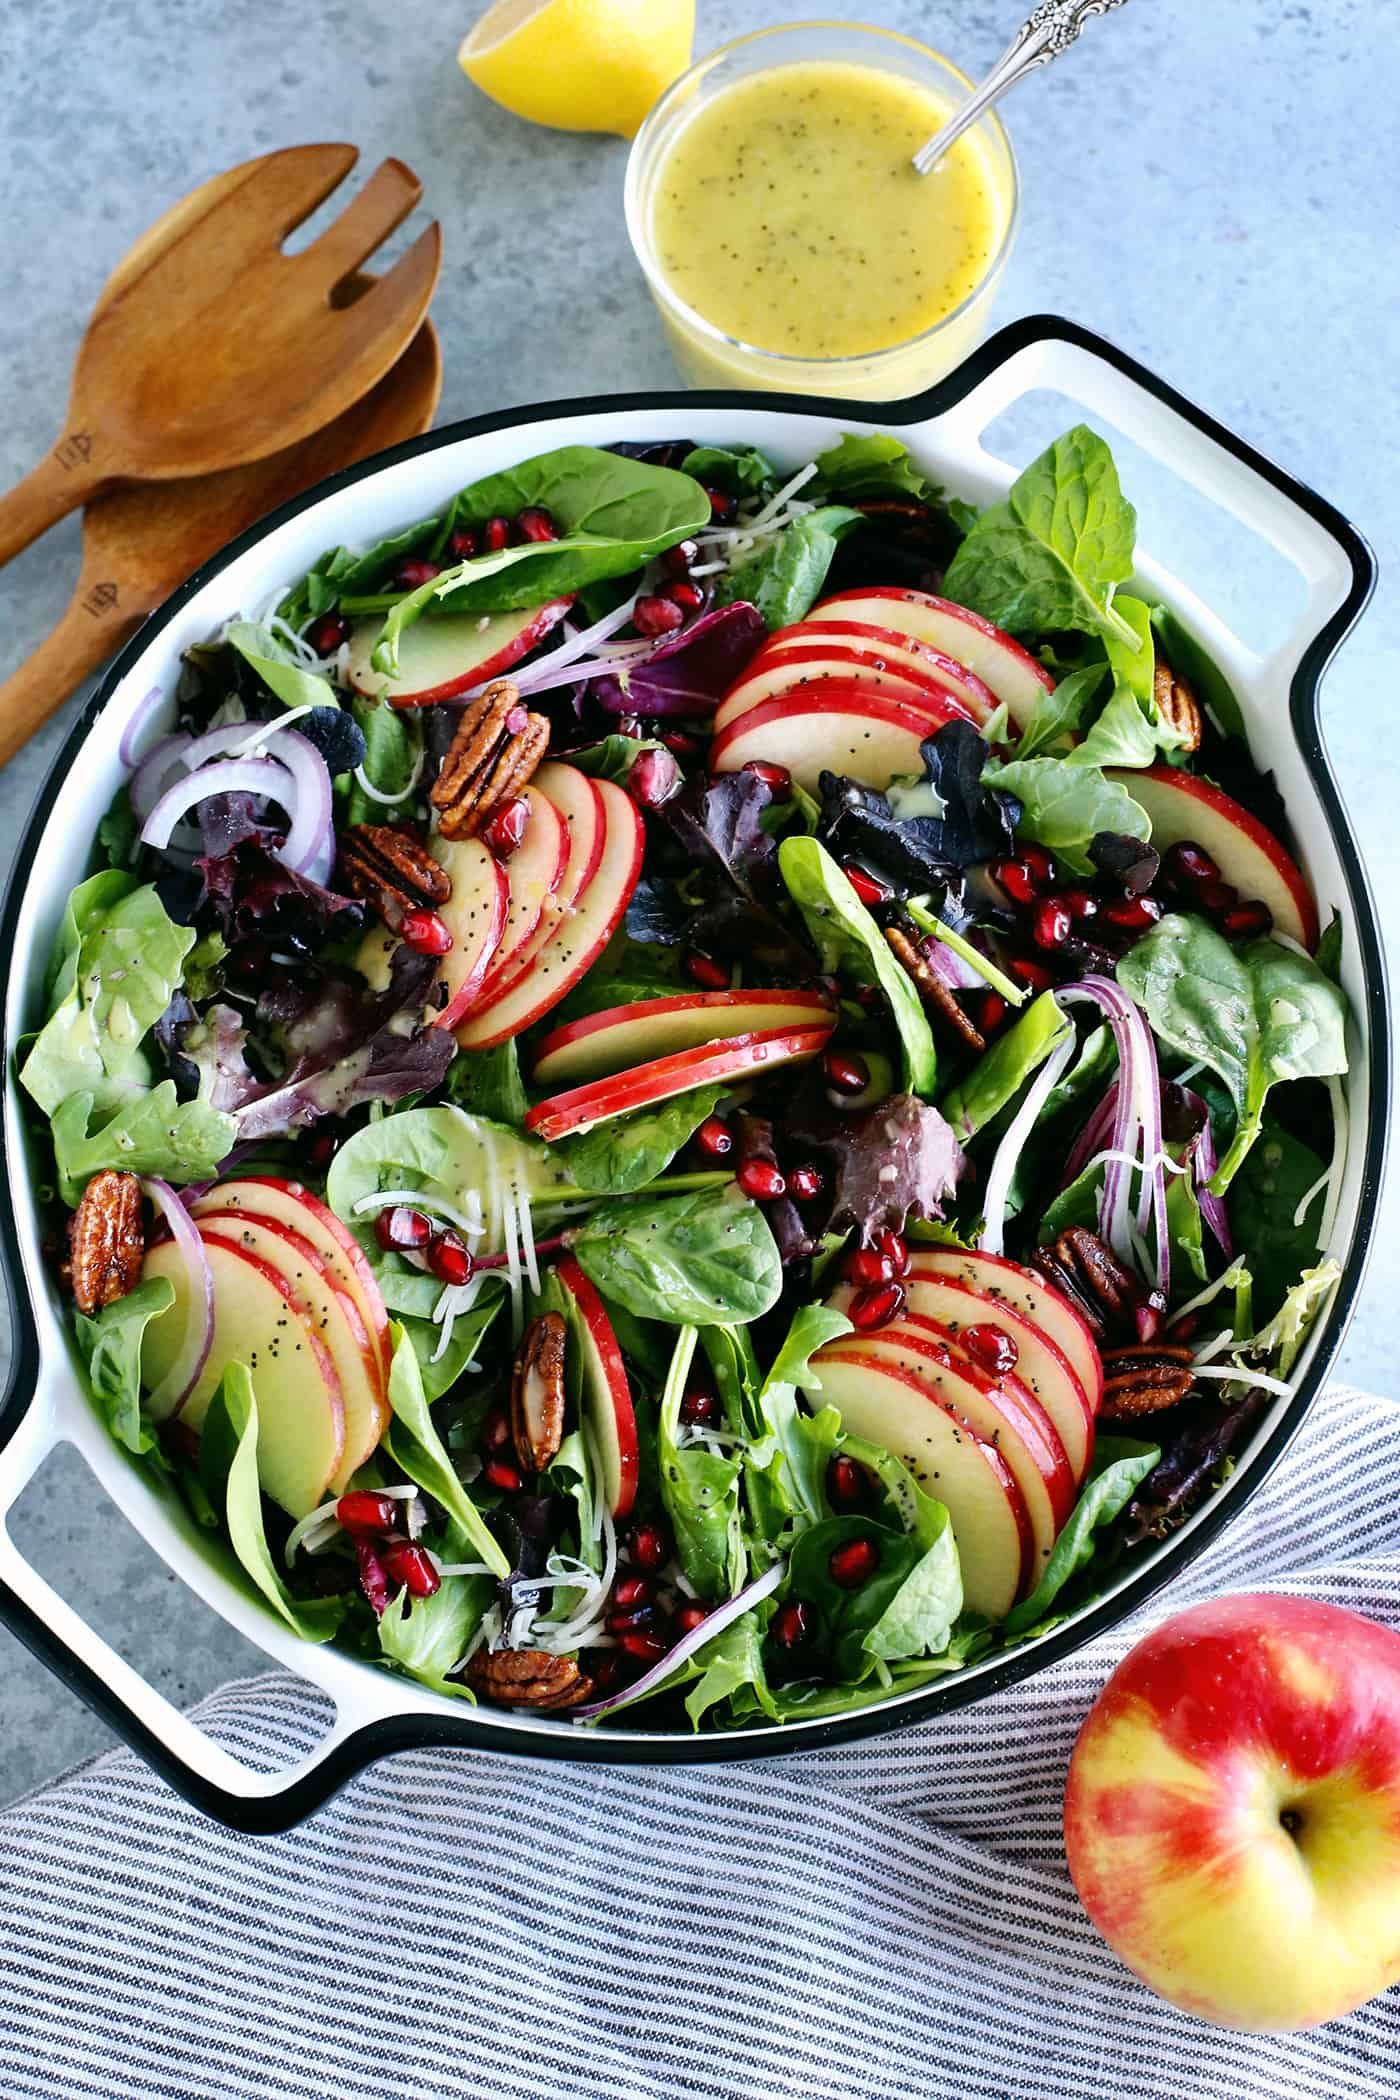 a large bowl of fresh salad greens, sliced apples, pecans, and pomegranate arils